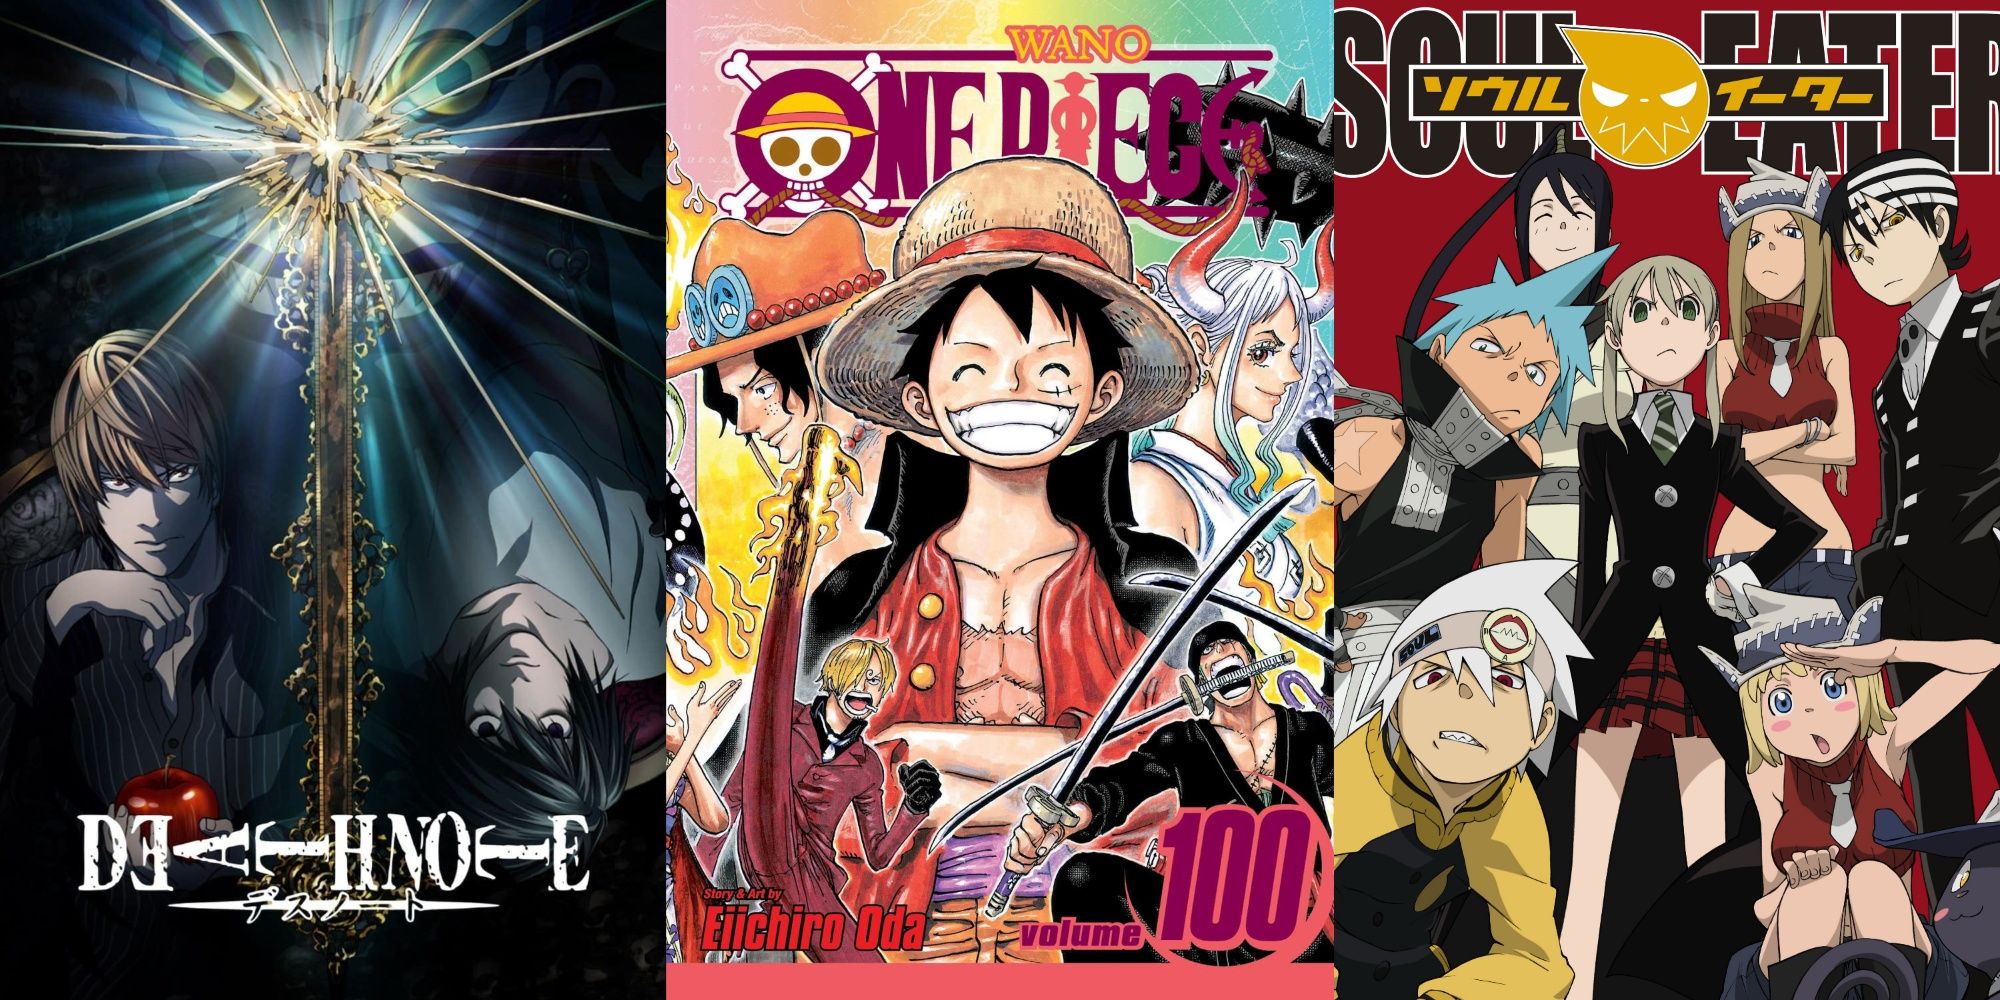 Death note, one piece and soul eater